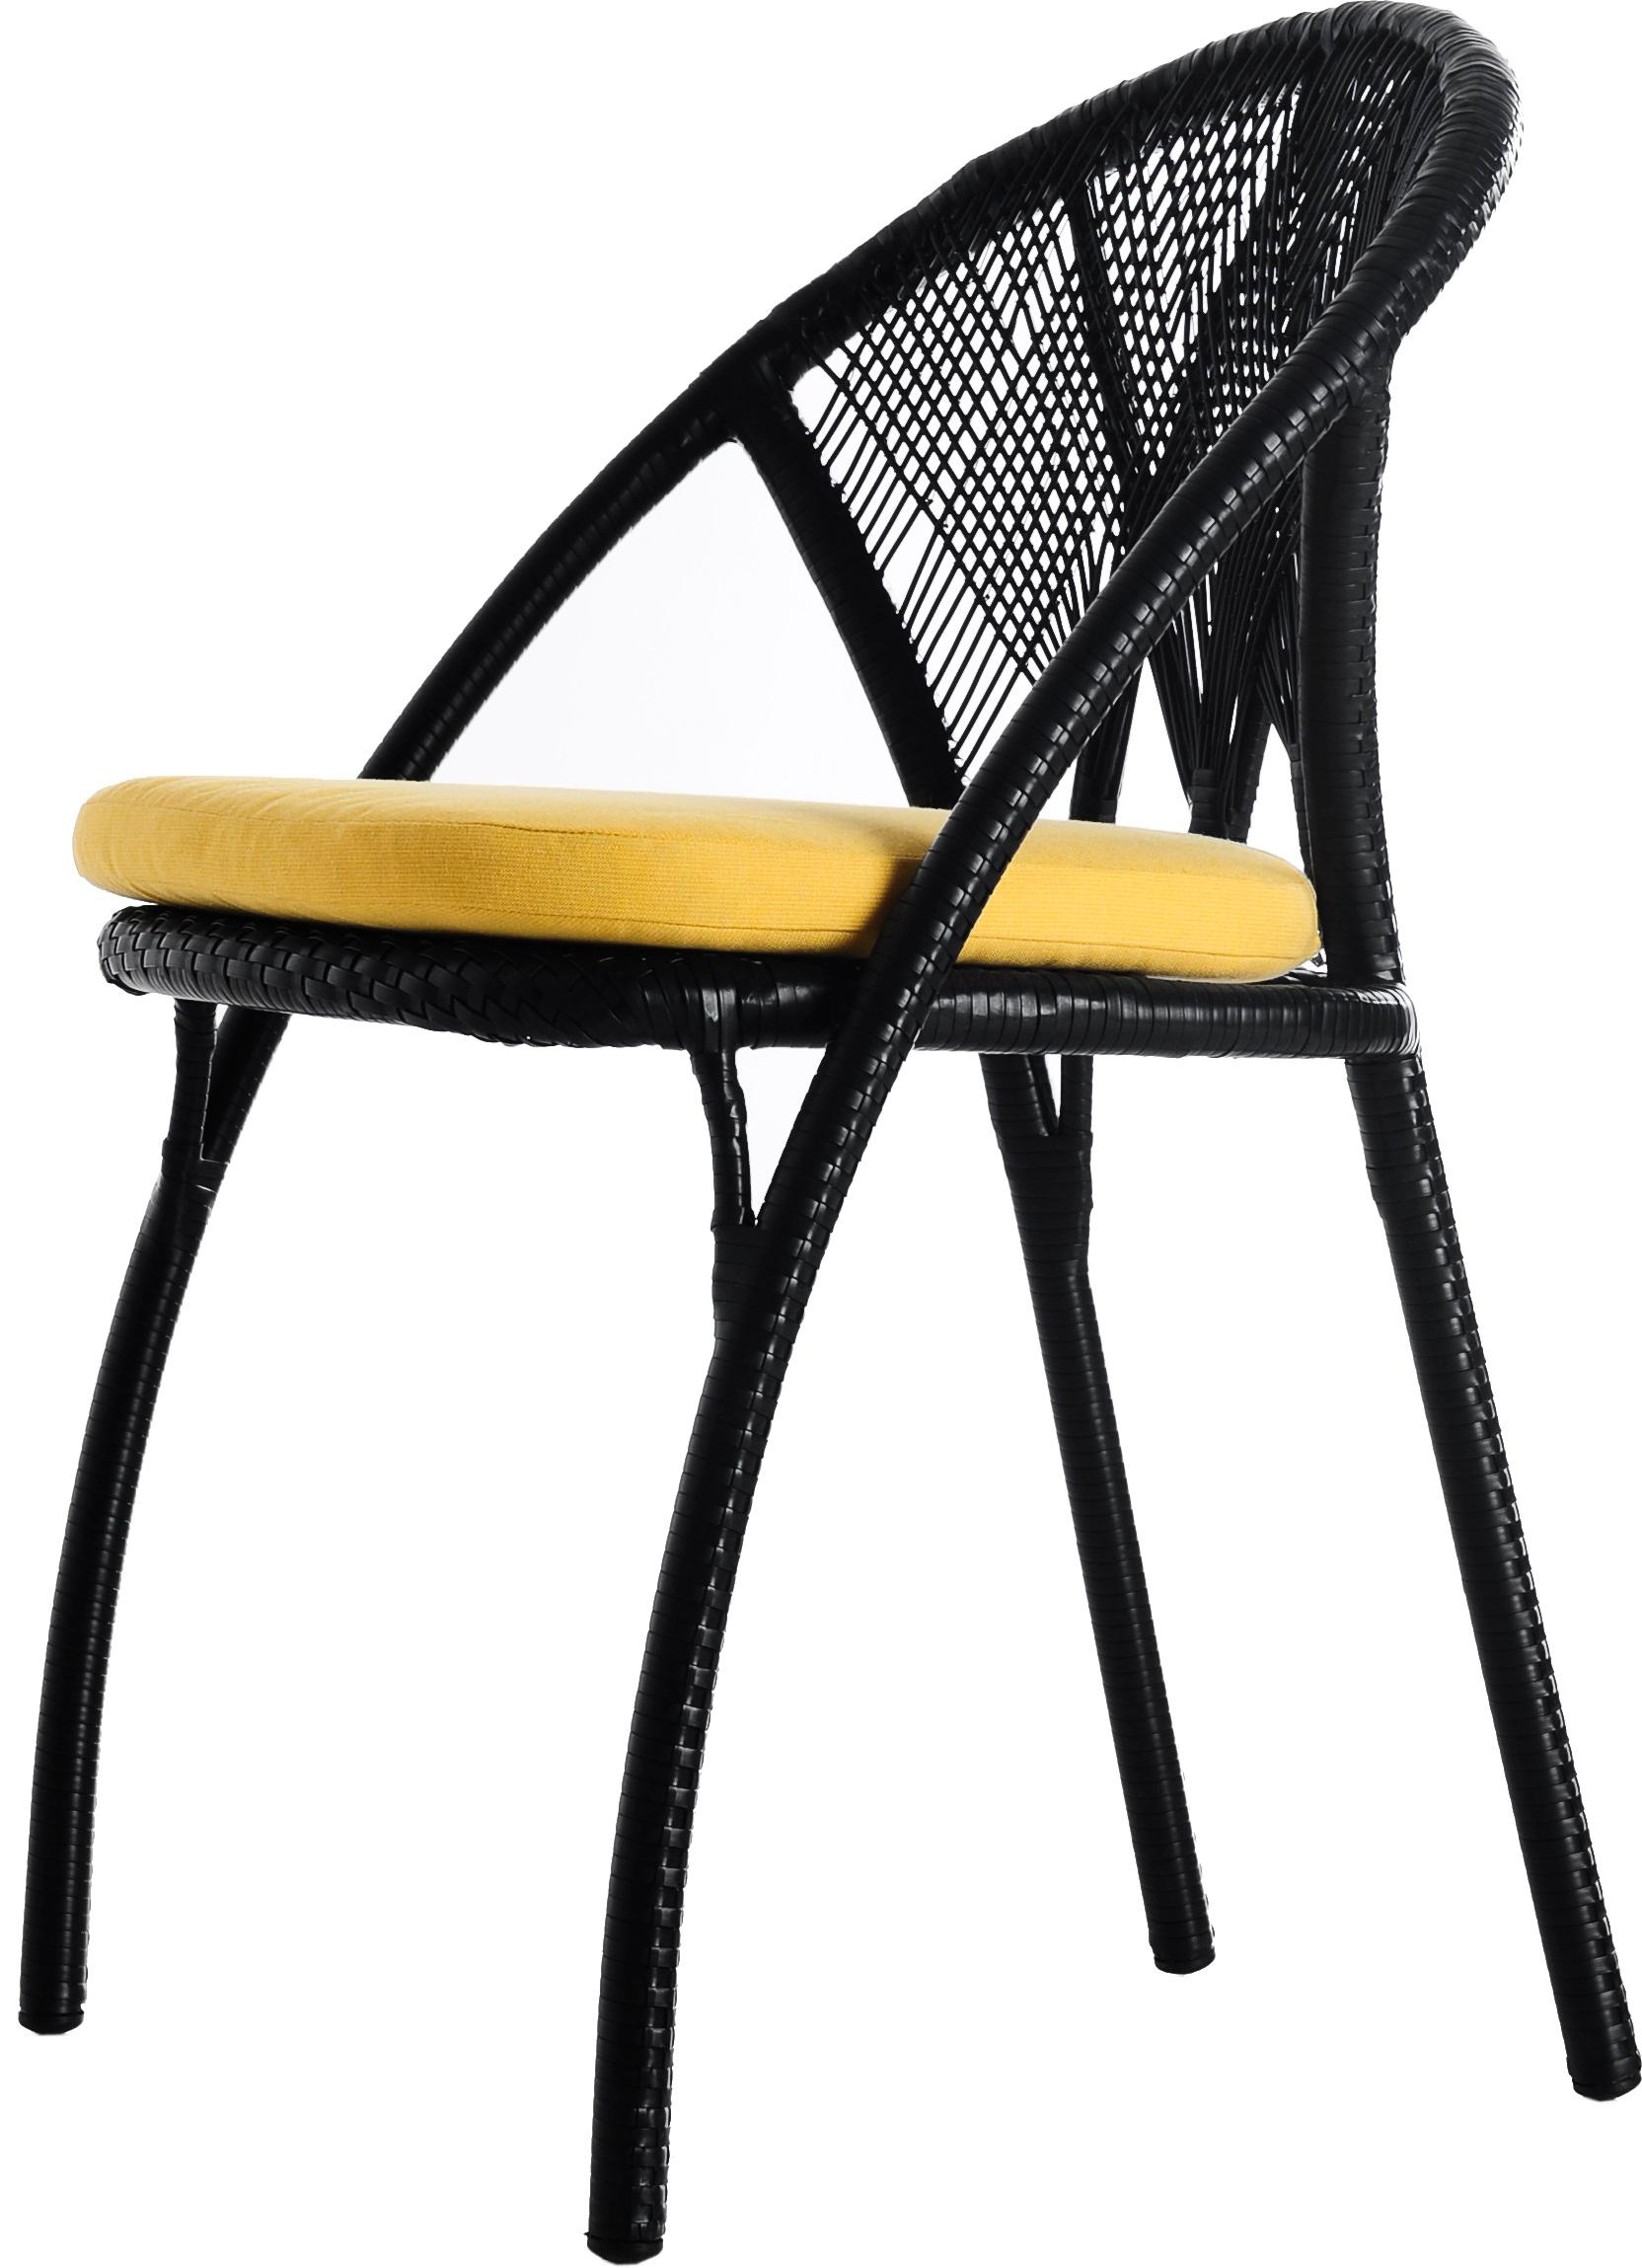 Hagia side chair b by Kenneth Cobonpue.
Materials: polyethelene, nylon. steel.
Also available in other colors.
Dimensions: 54 cm x 55 cm x H 83 cm.

Bask in Hagia’s regal luxury and romantic gothic aesthetic. Beneath an intricately handwoven